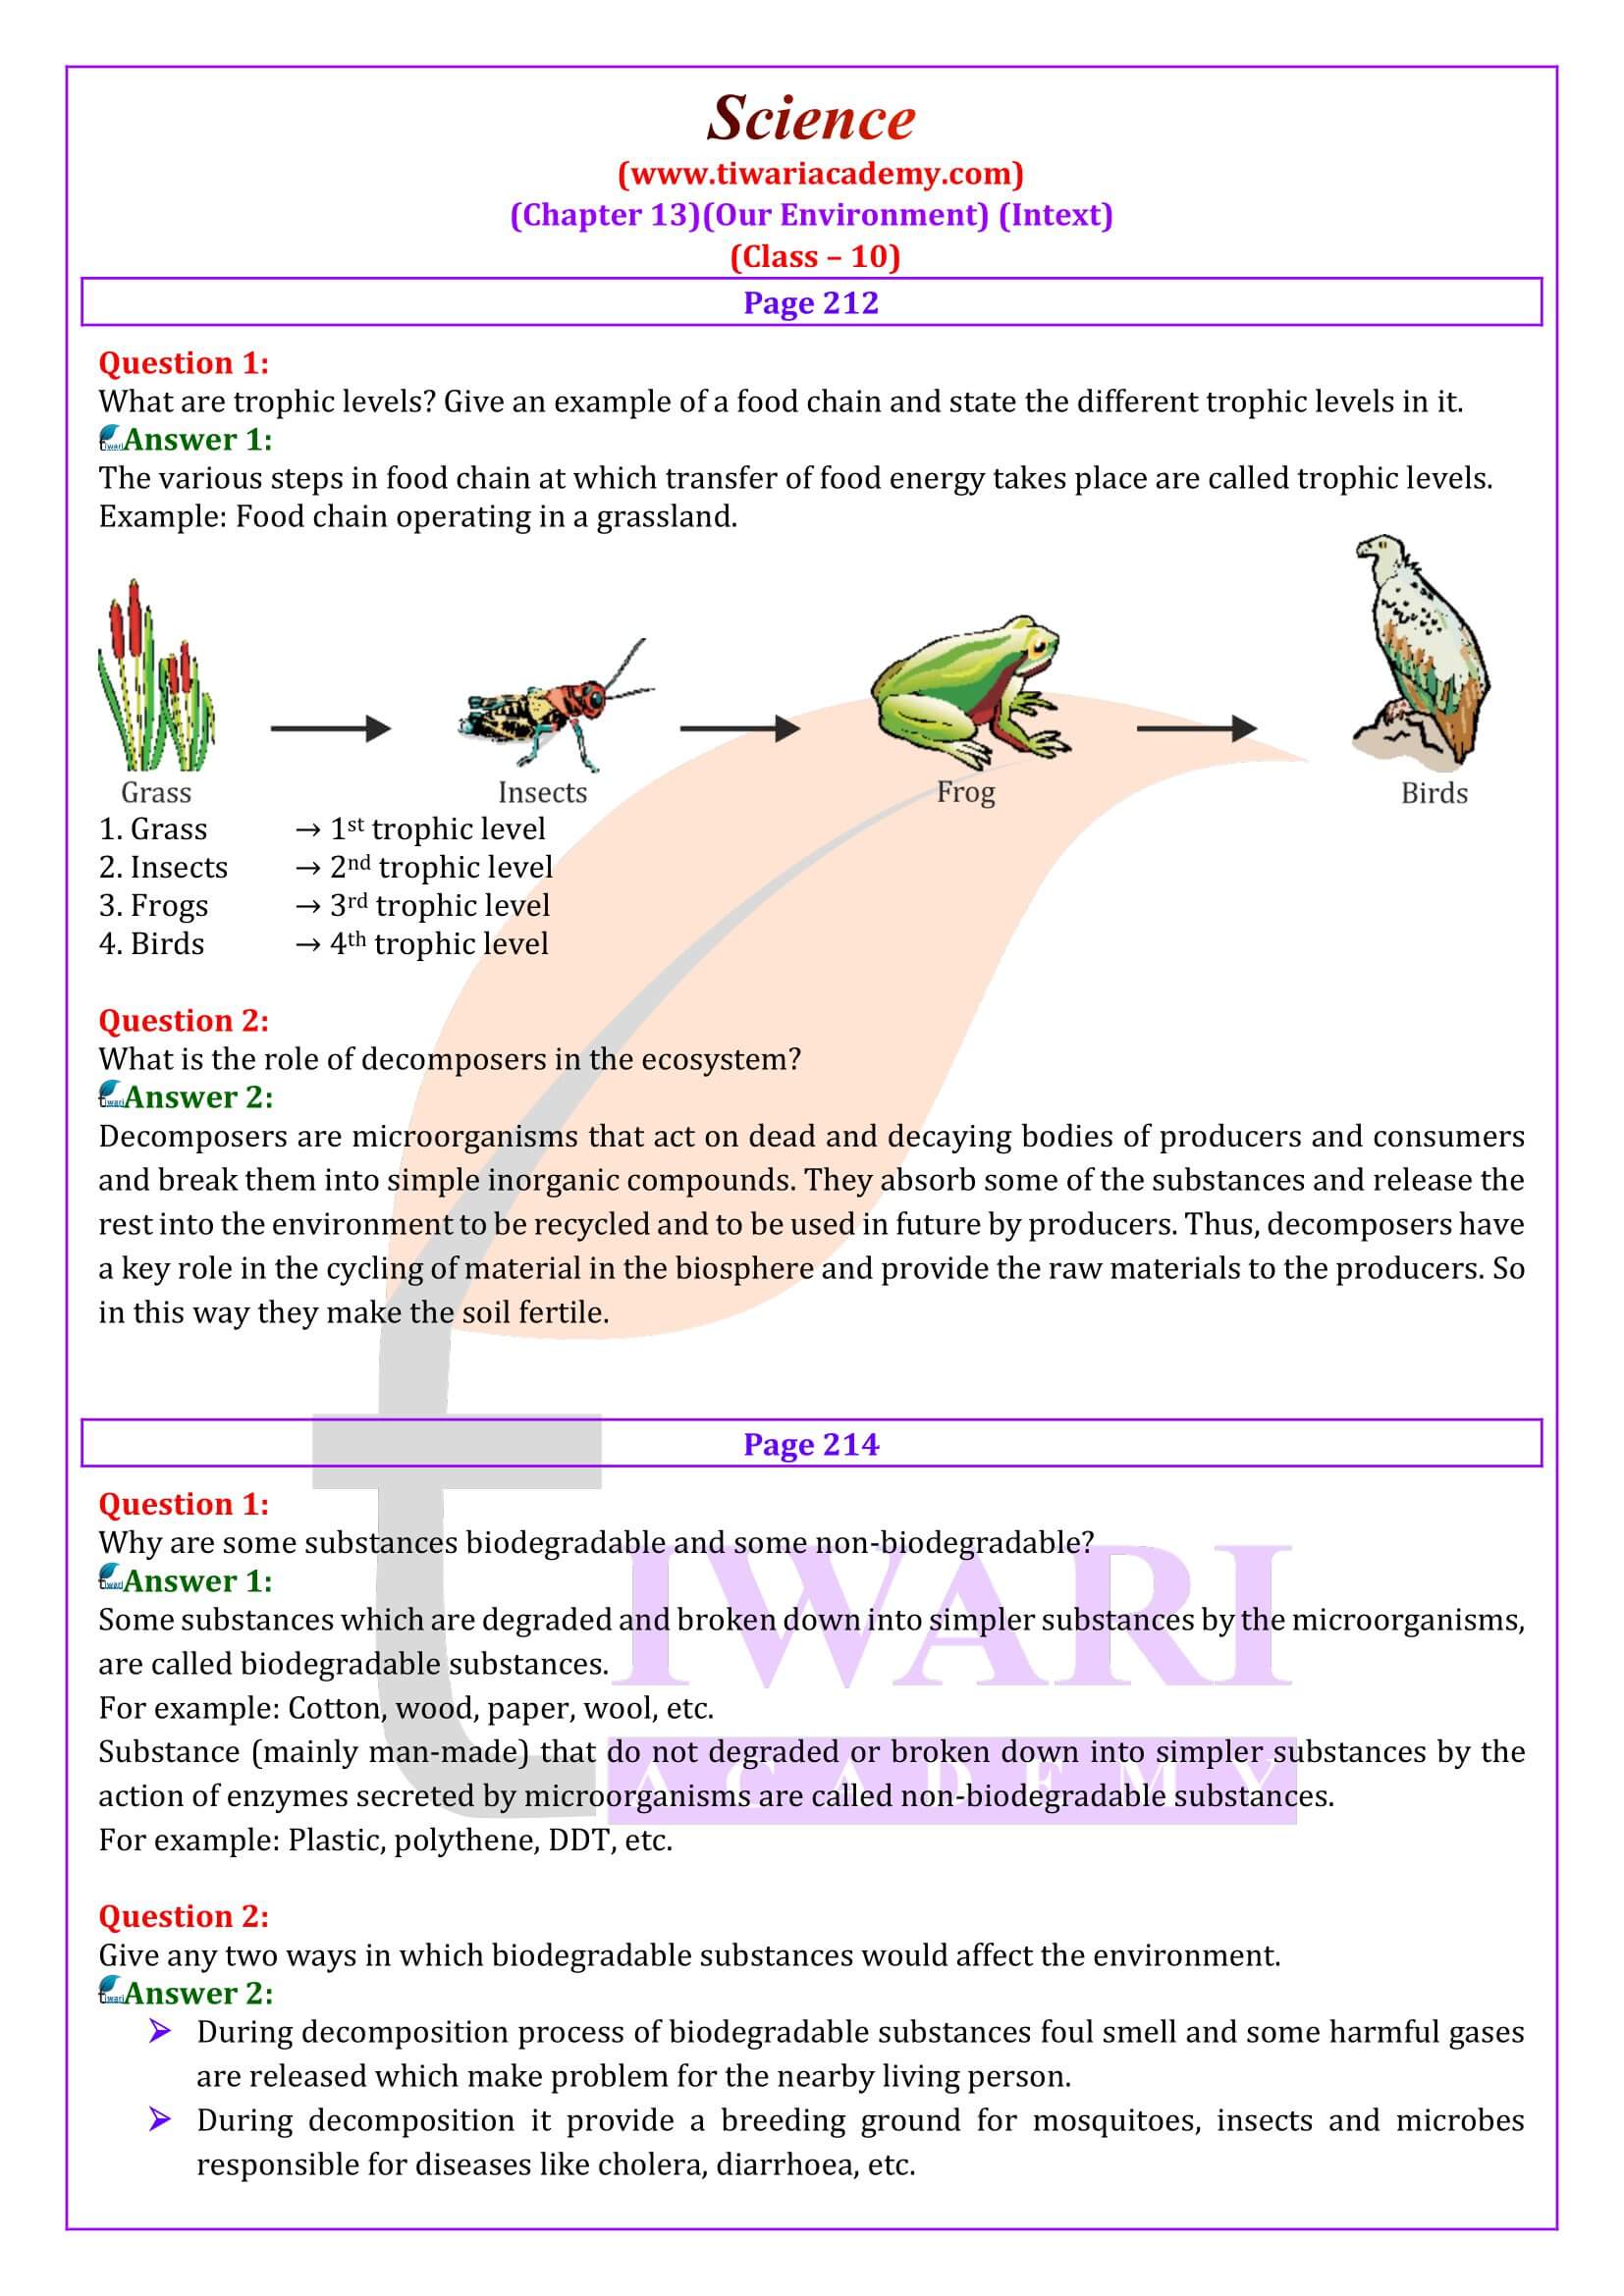 NCERT Solutions for Class 10 Science Chapter 13 intext questions